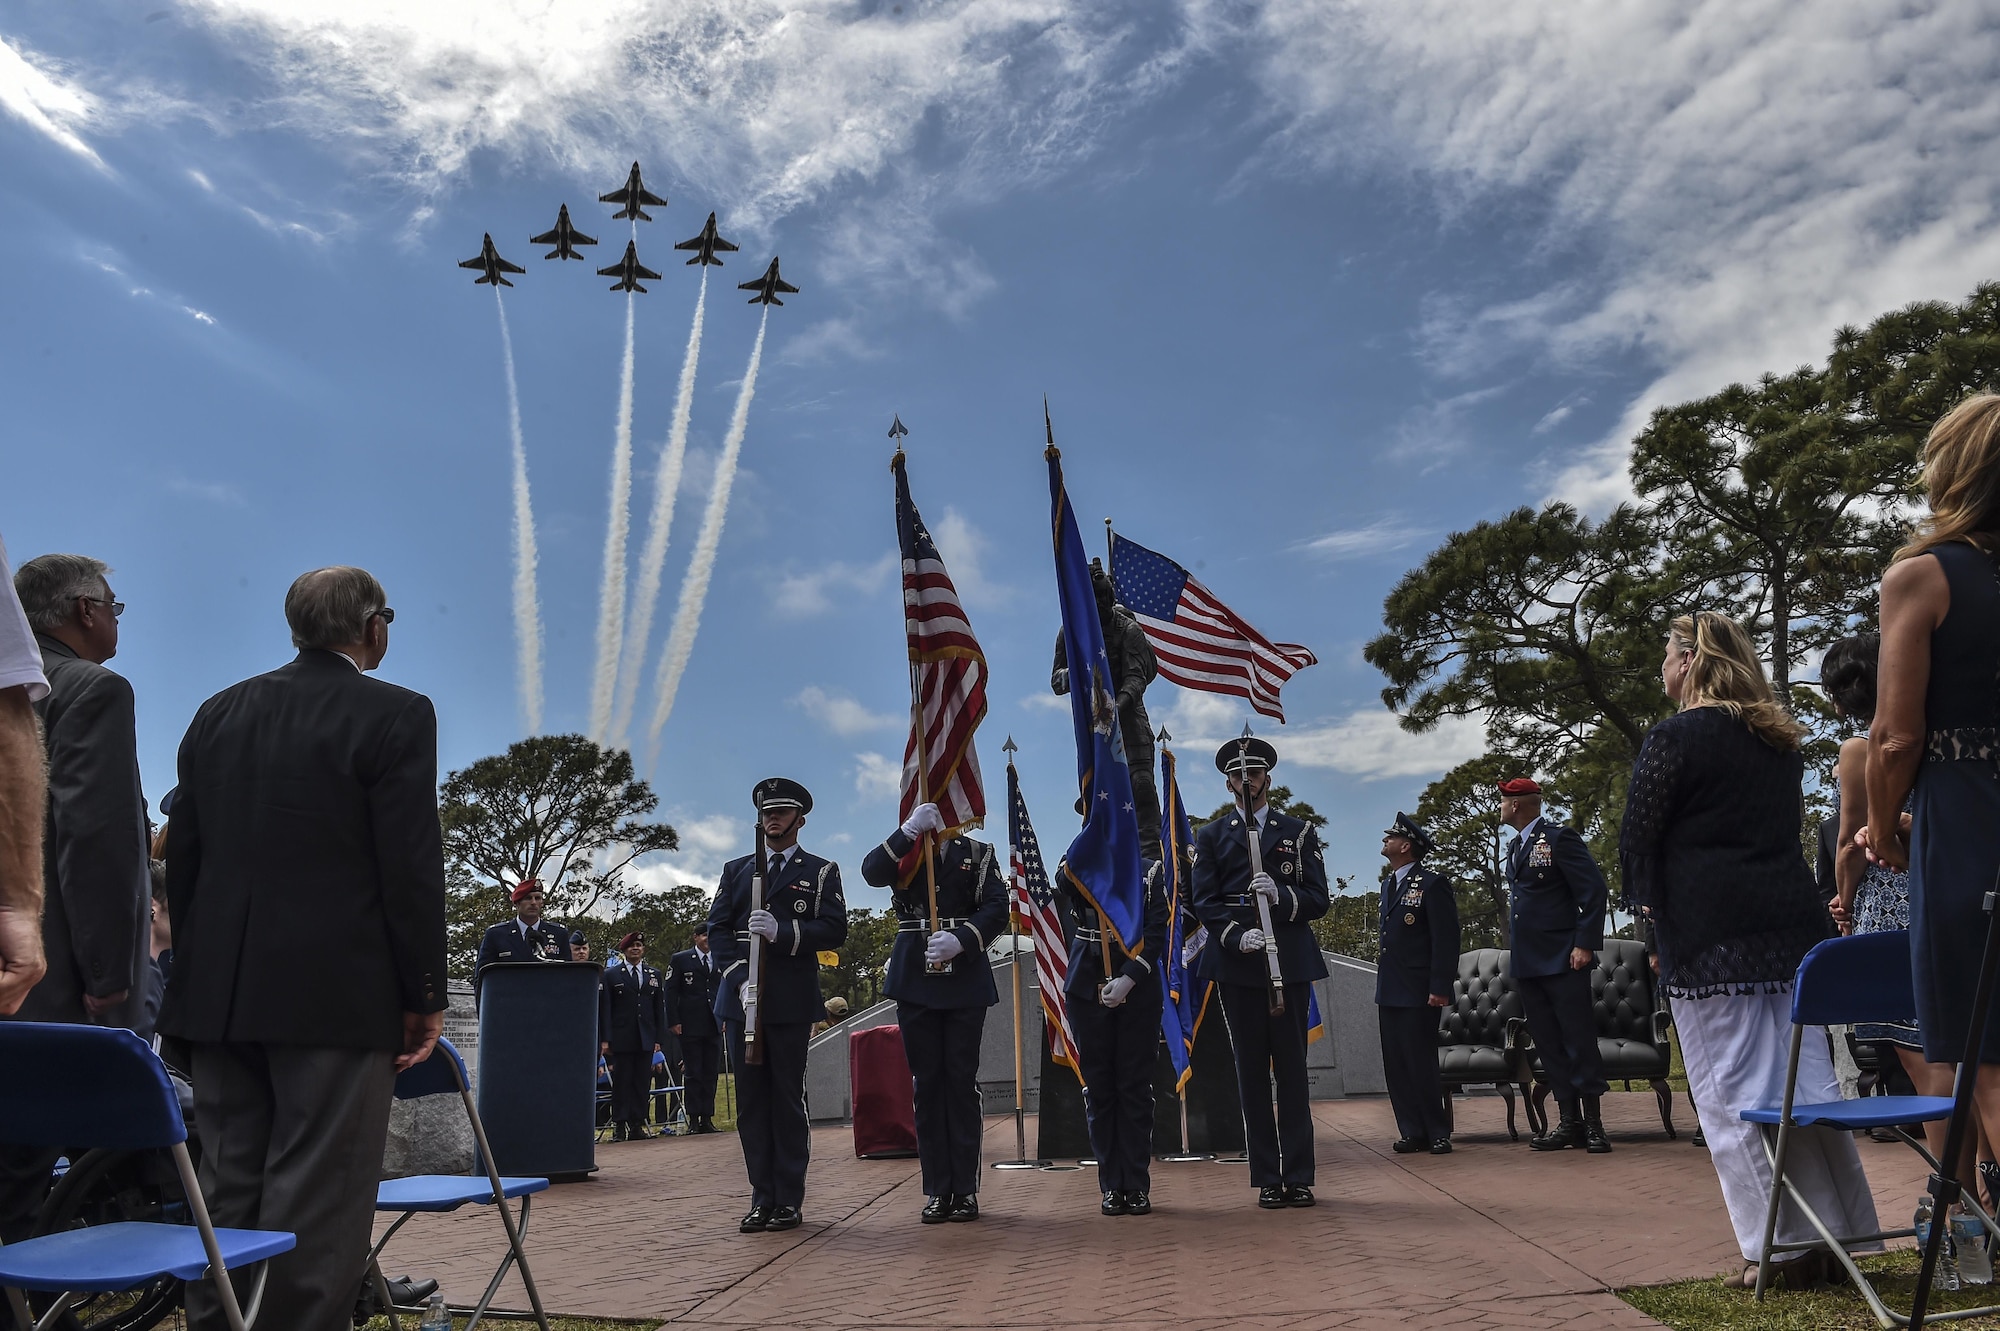 The U.S. Air Force Thunderbirds perform a flyover as the Pensacola Christian College choir sings the National Anthem during a dual Air Force Cross ceremony, April 20, 2017, at Hurlburt Field, Fla. For the first time in Air Force history, two Airmen were simultaneously awarded the service’s highest medal for valorous action in combat. Miller, from the Air National Guard’s 123rd Special Tactics Squadron, and Chris Baradat, a combat controller since separated, both received Silver Star medals for their actions in combat, which were upgraded after a service-wide review. (U.S. Air Force photo by Senior Airman Ryan Conroy) 